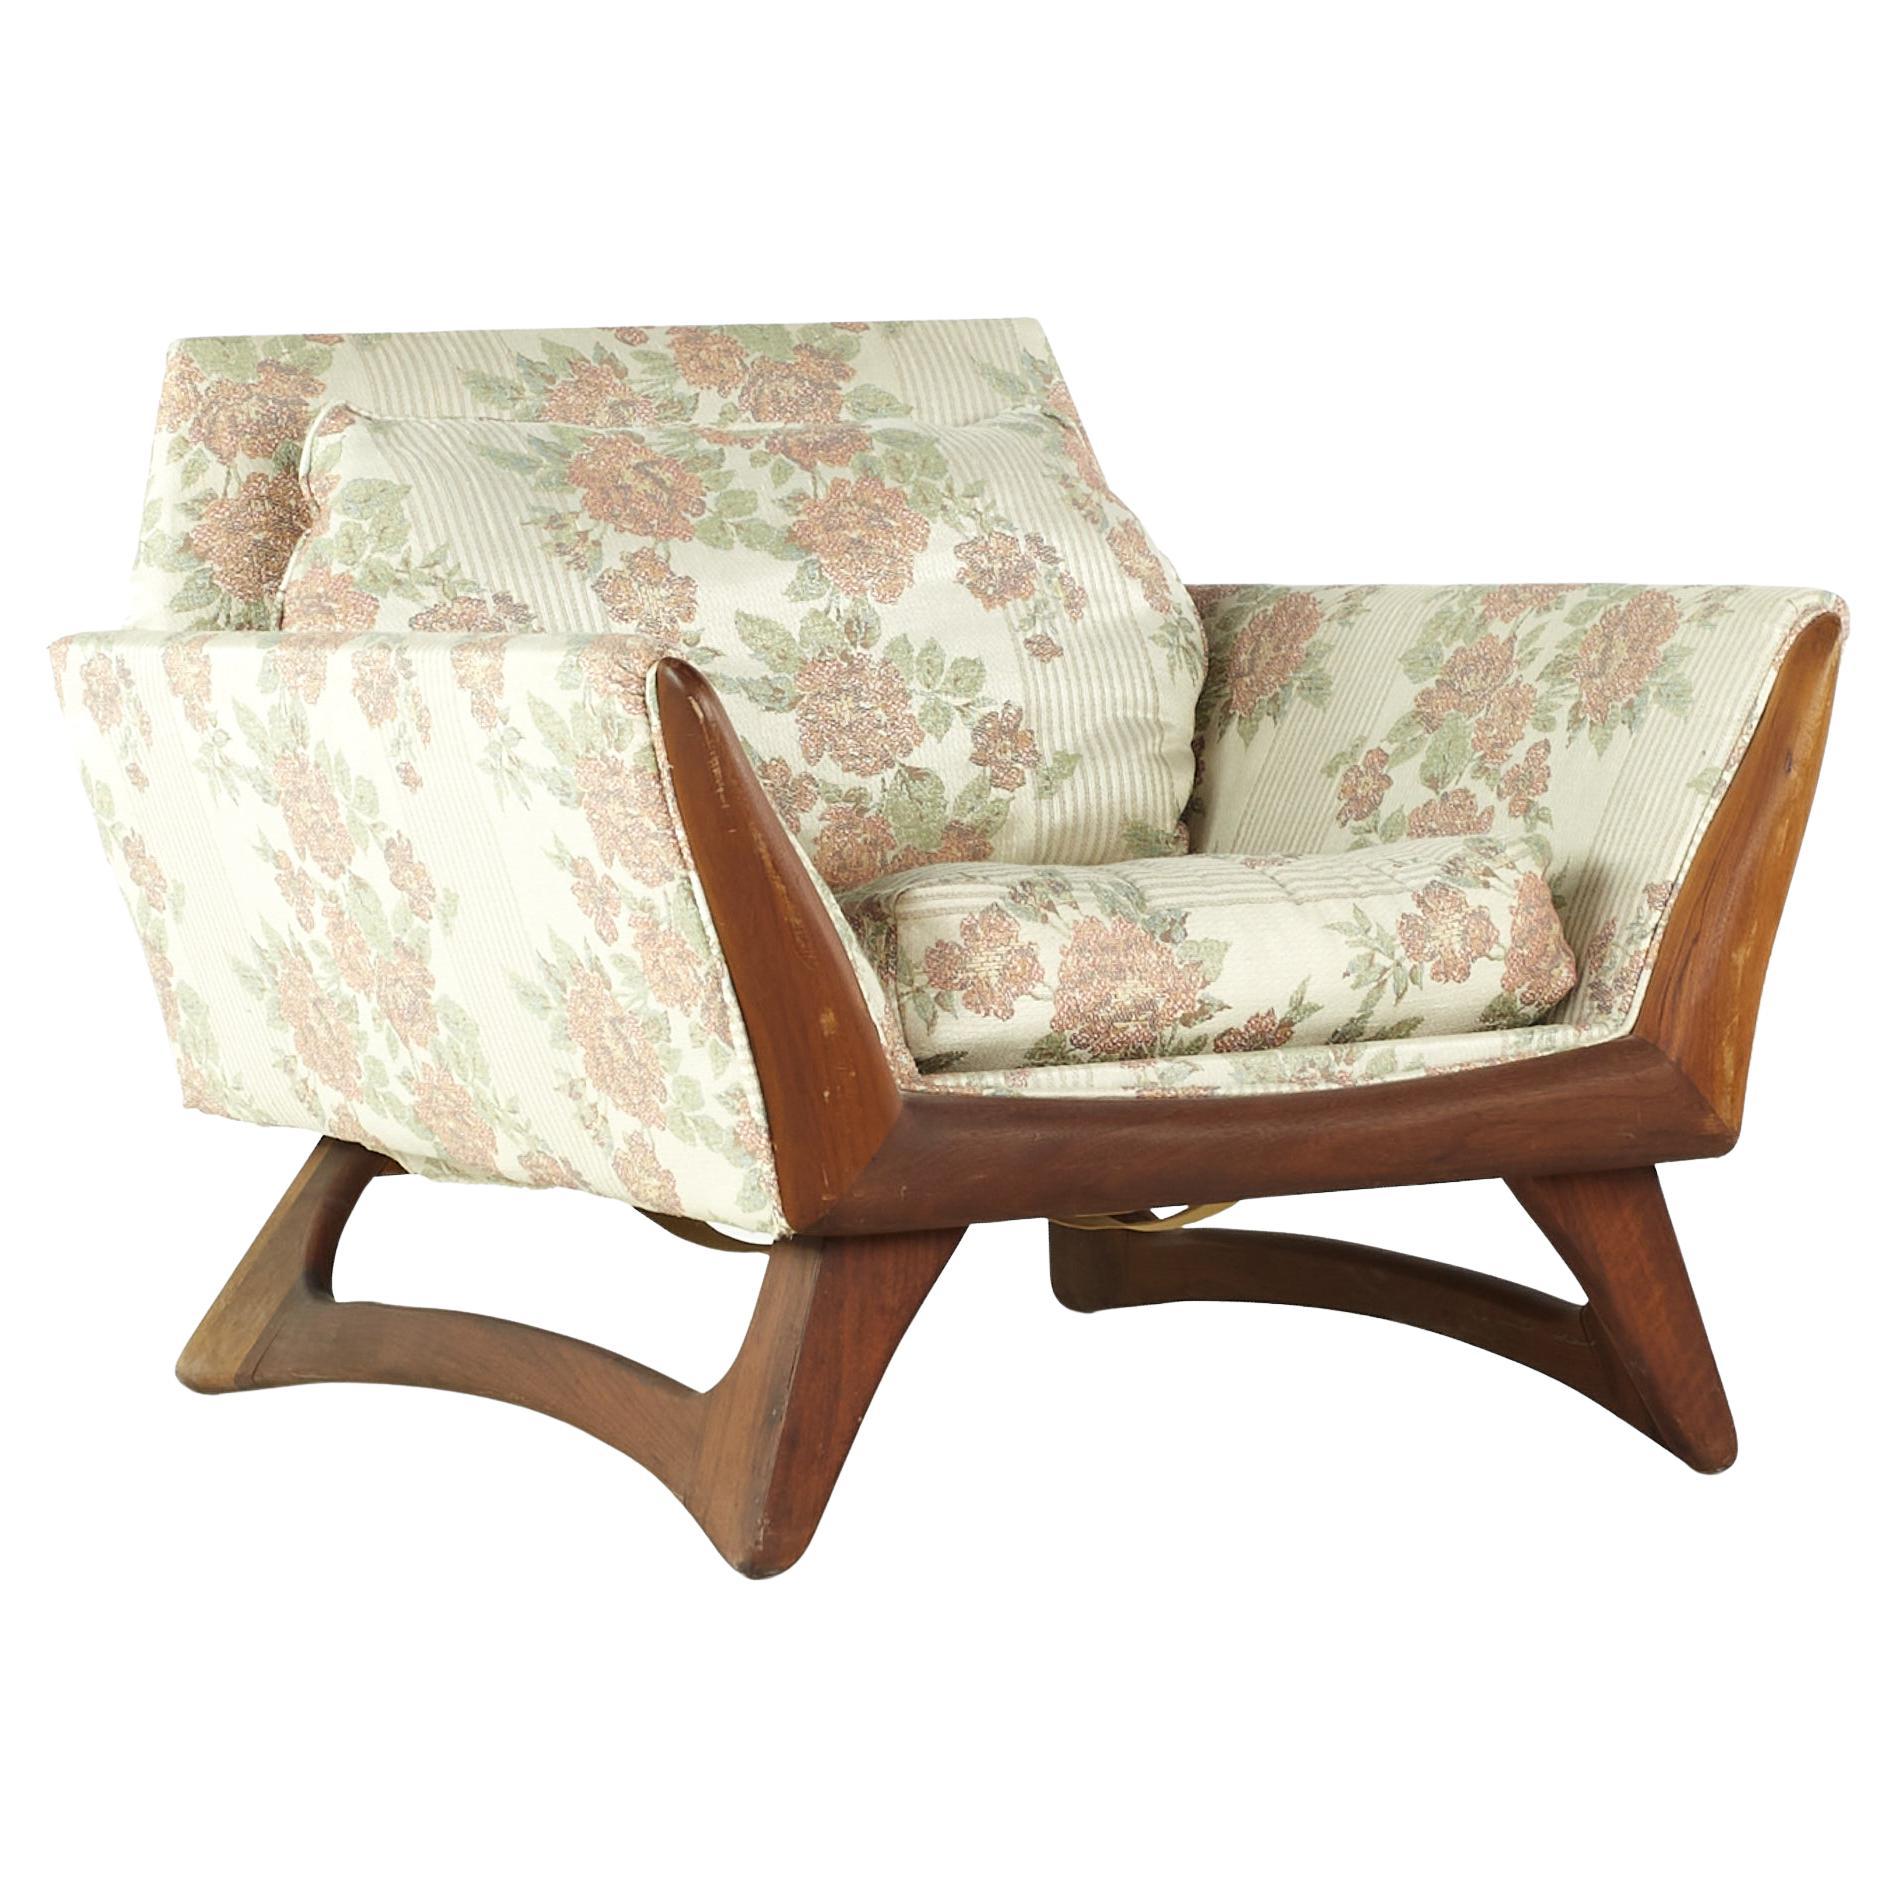 Adrian Pearsall Midcentury Walnut Lounge Chair For Sale